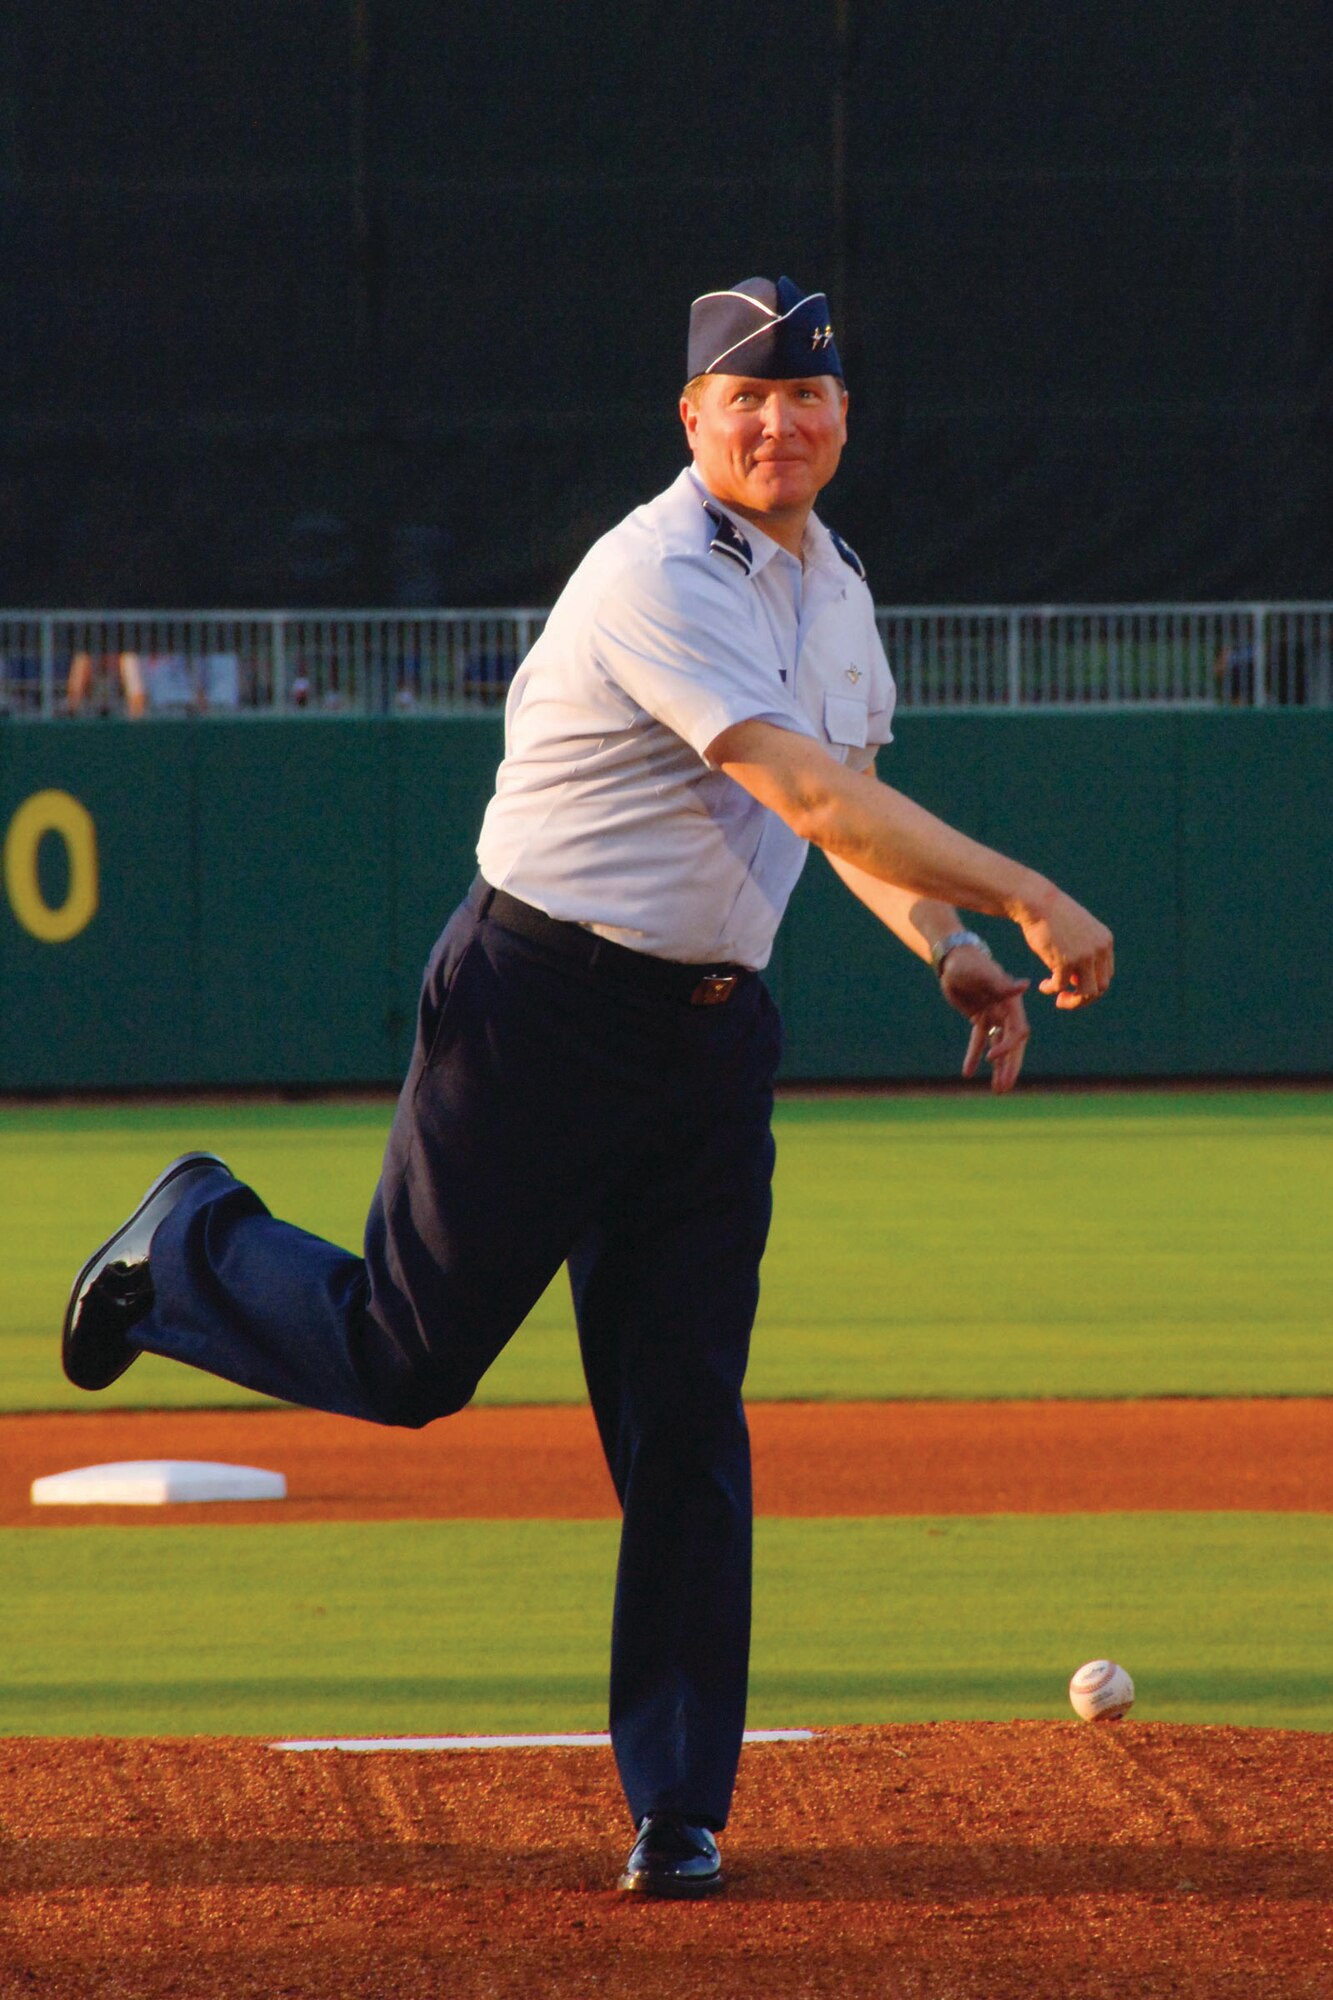 Spaatz Center commander, Maj. Gen. Maury Forsyth throws out the first pitch at the Montgomery Biscuits annual Military Appreciation Night baseball game. The Biscuits, a double-A minor league team affiliated with the major league Tampa Bay Rays, took on the Chattanooga Lookouts, losing 3-2. (U.S. Air Force photo/Donna Burnett)